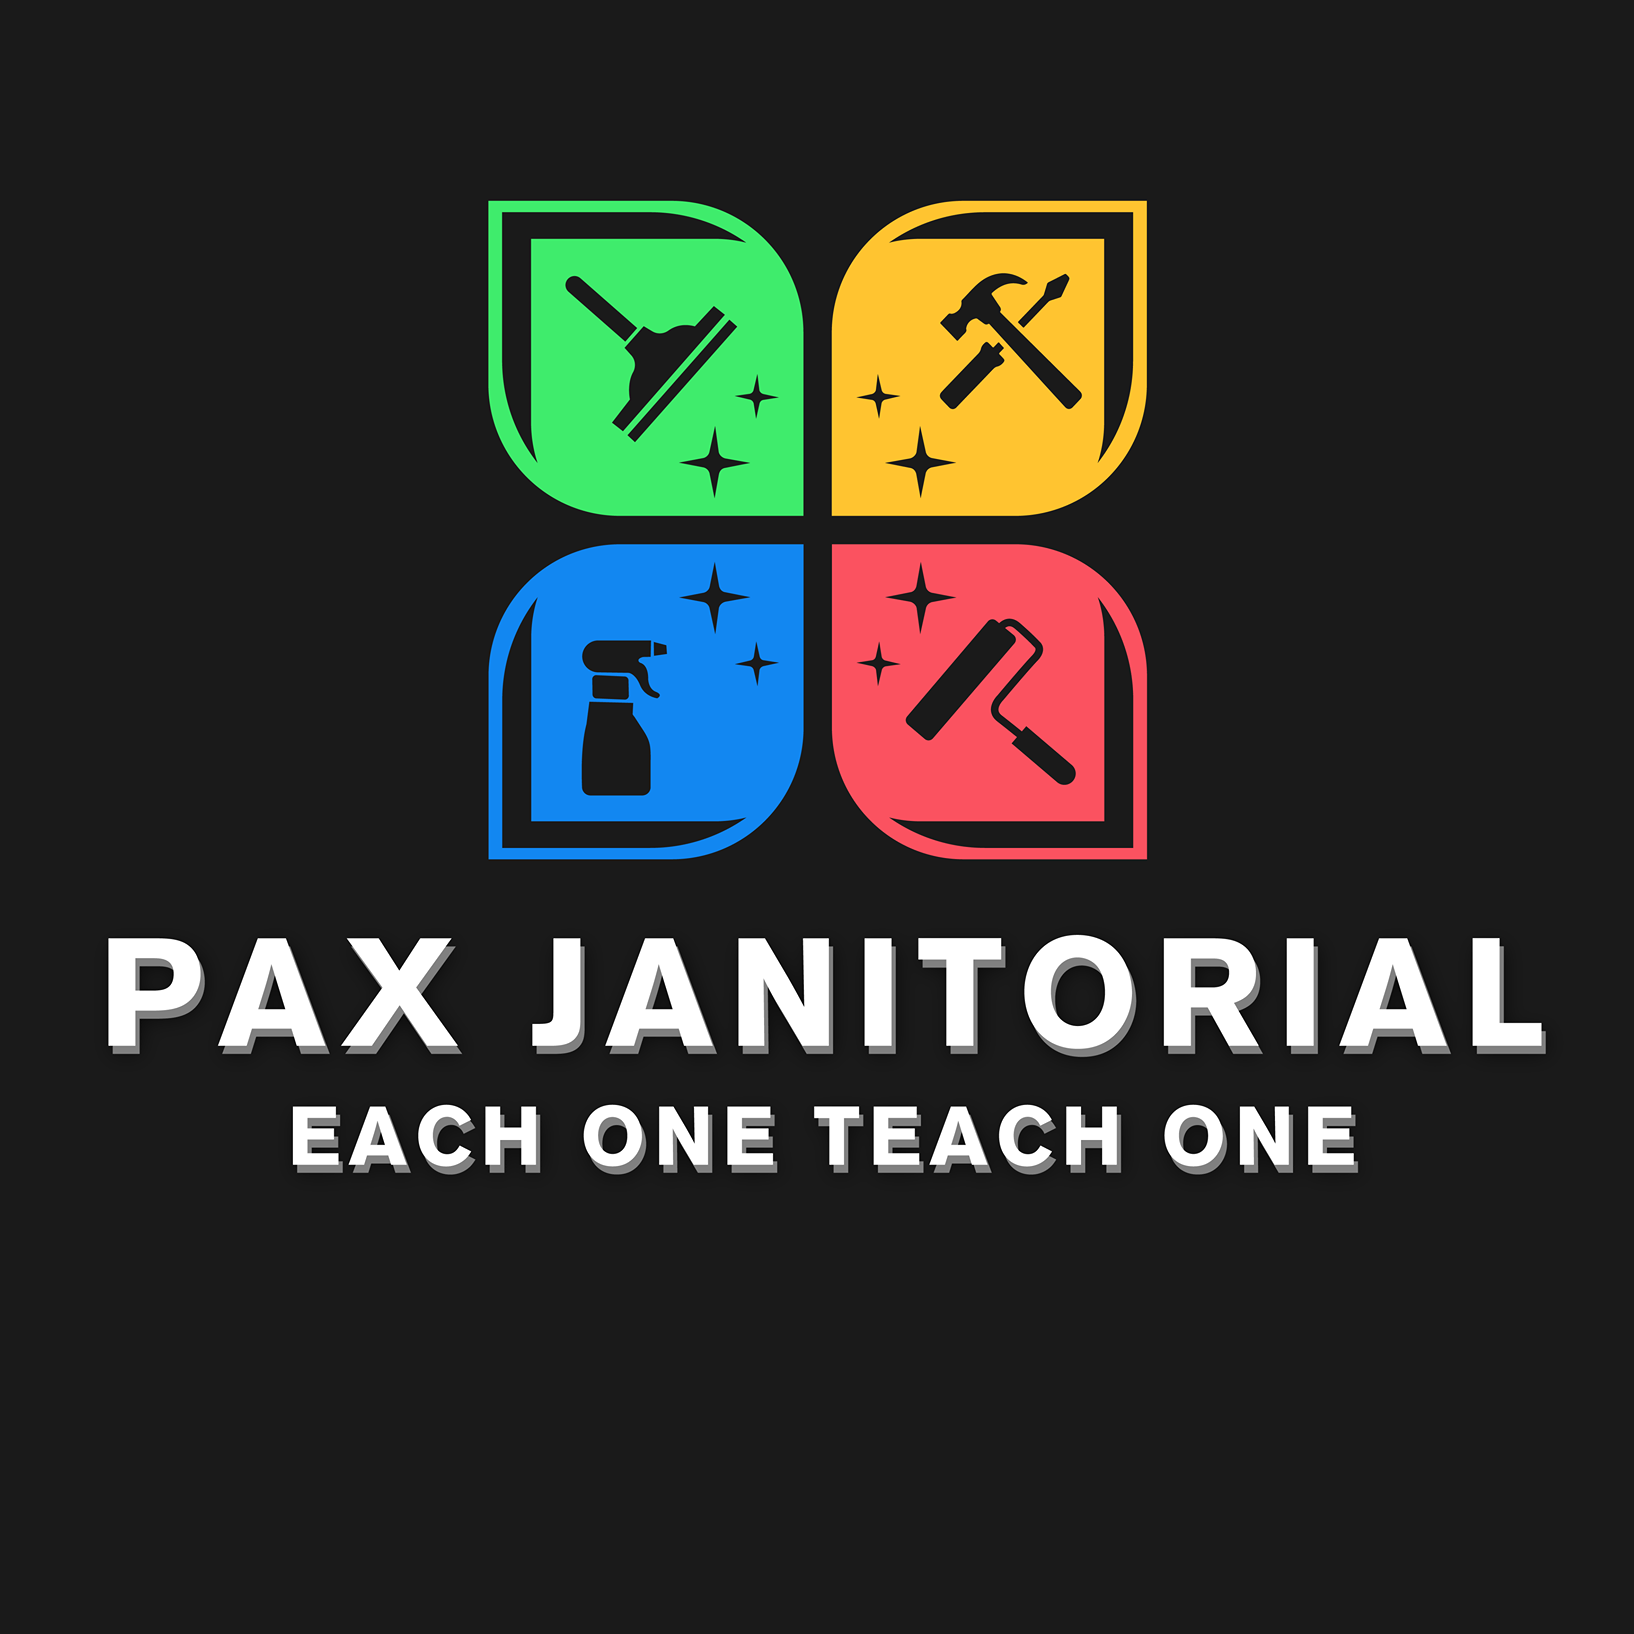 Pax Janitorial